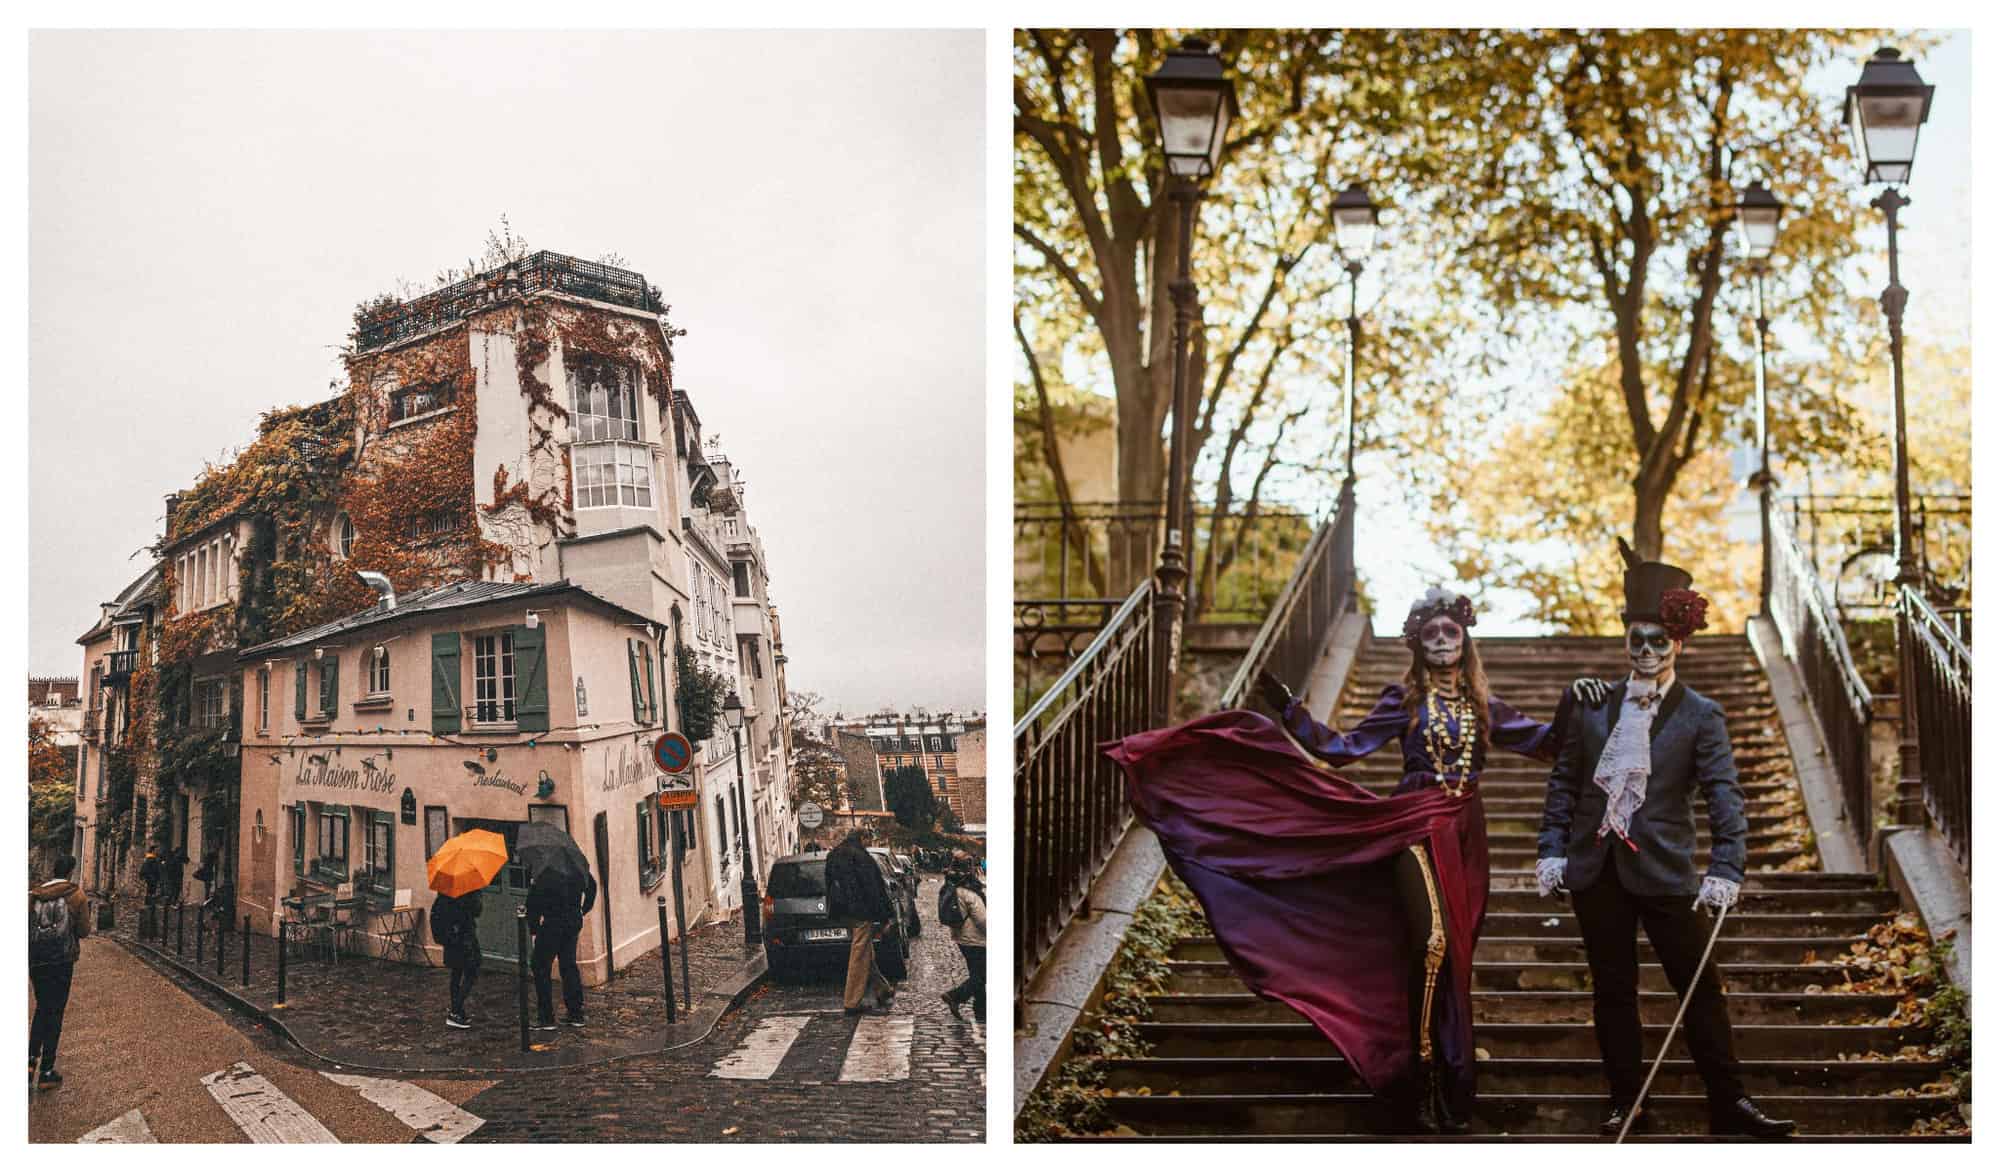 Left: The famous Maison Rose of Montmartre in the fall. Right: A man and a woman dressed for the Mexican Day of the Dead posing their costumes at a Montmartre staircase.